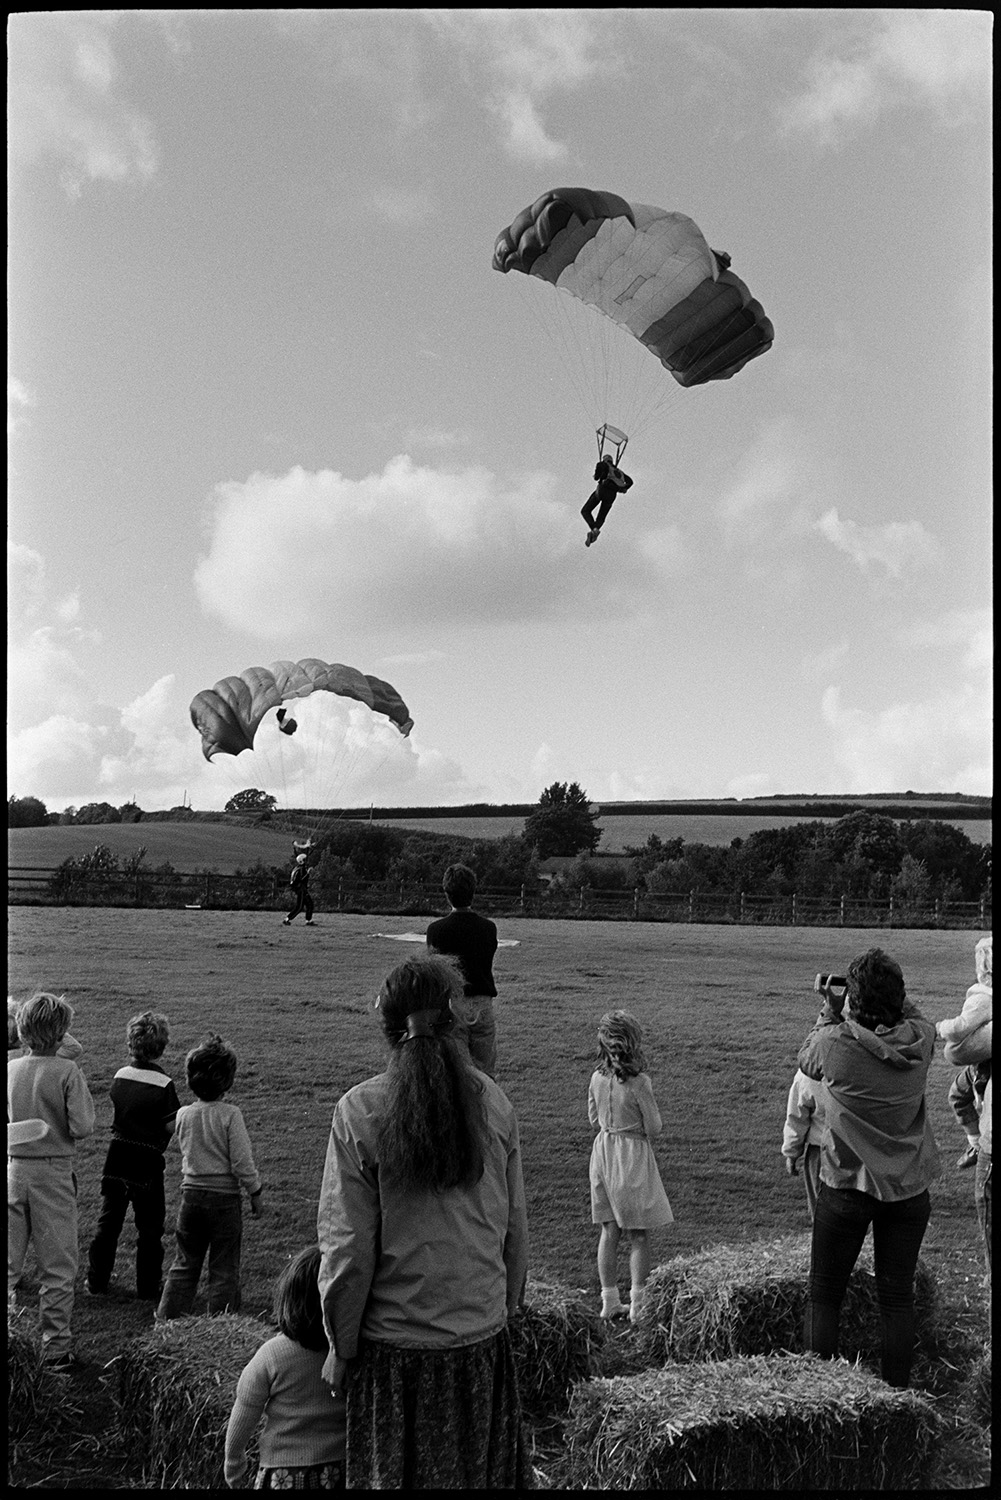 Sports Day, parachute landing races and spectators. 
[Two parachutists landing on the sports field at Dolton School sports day. Children and adults are watching them.]